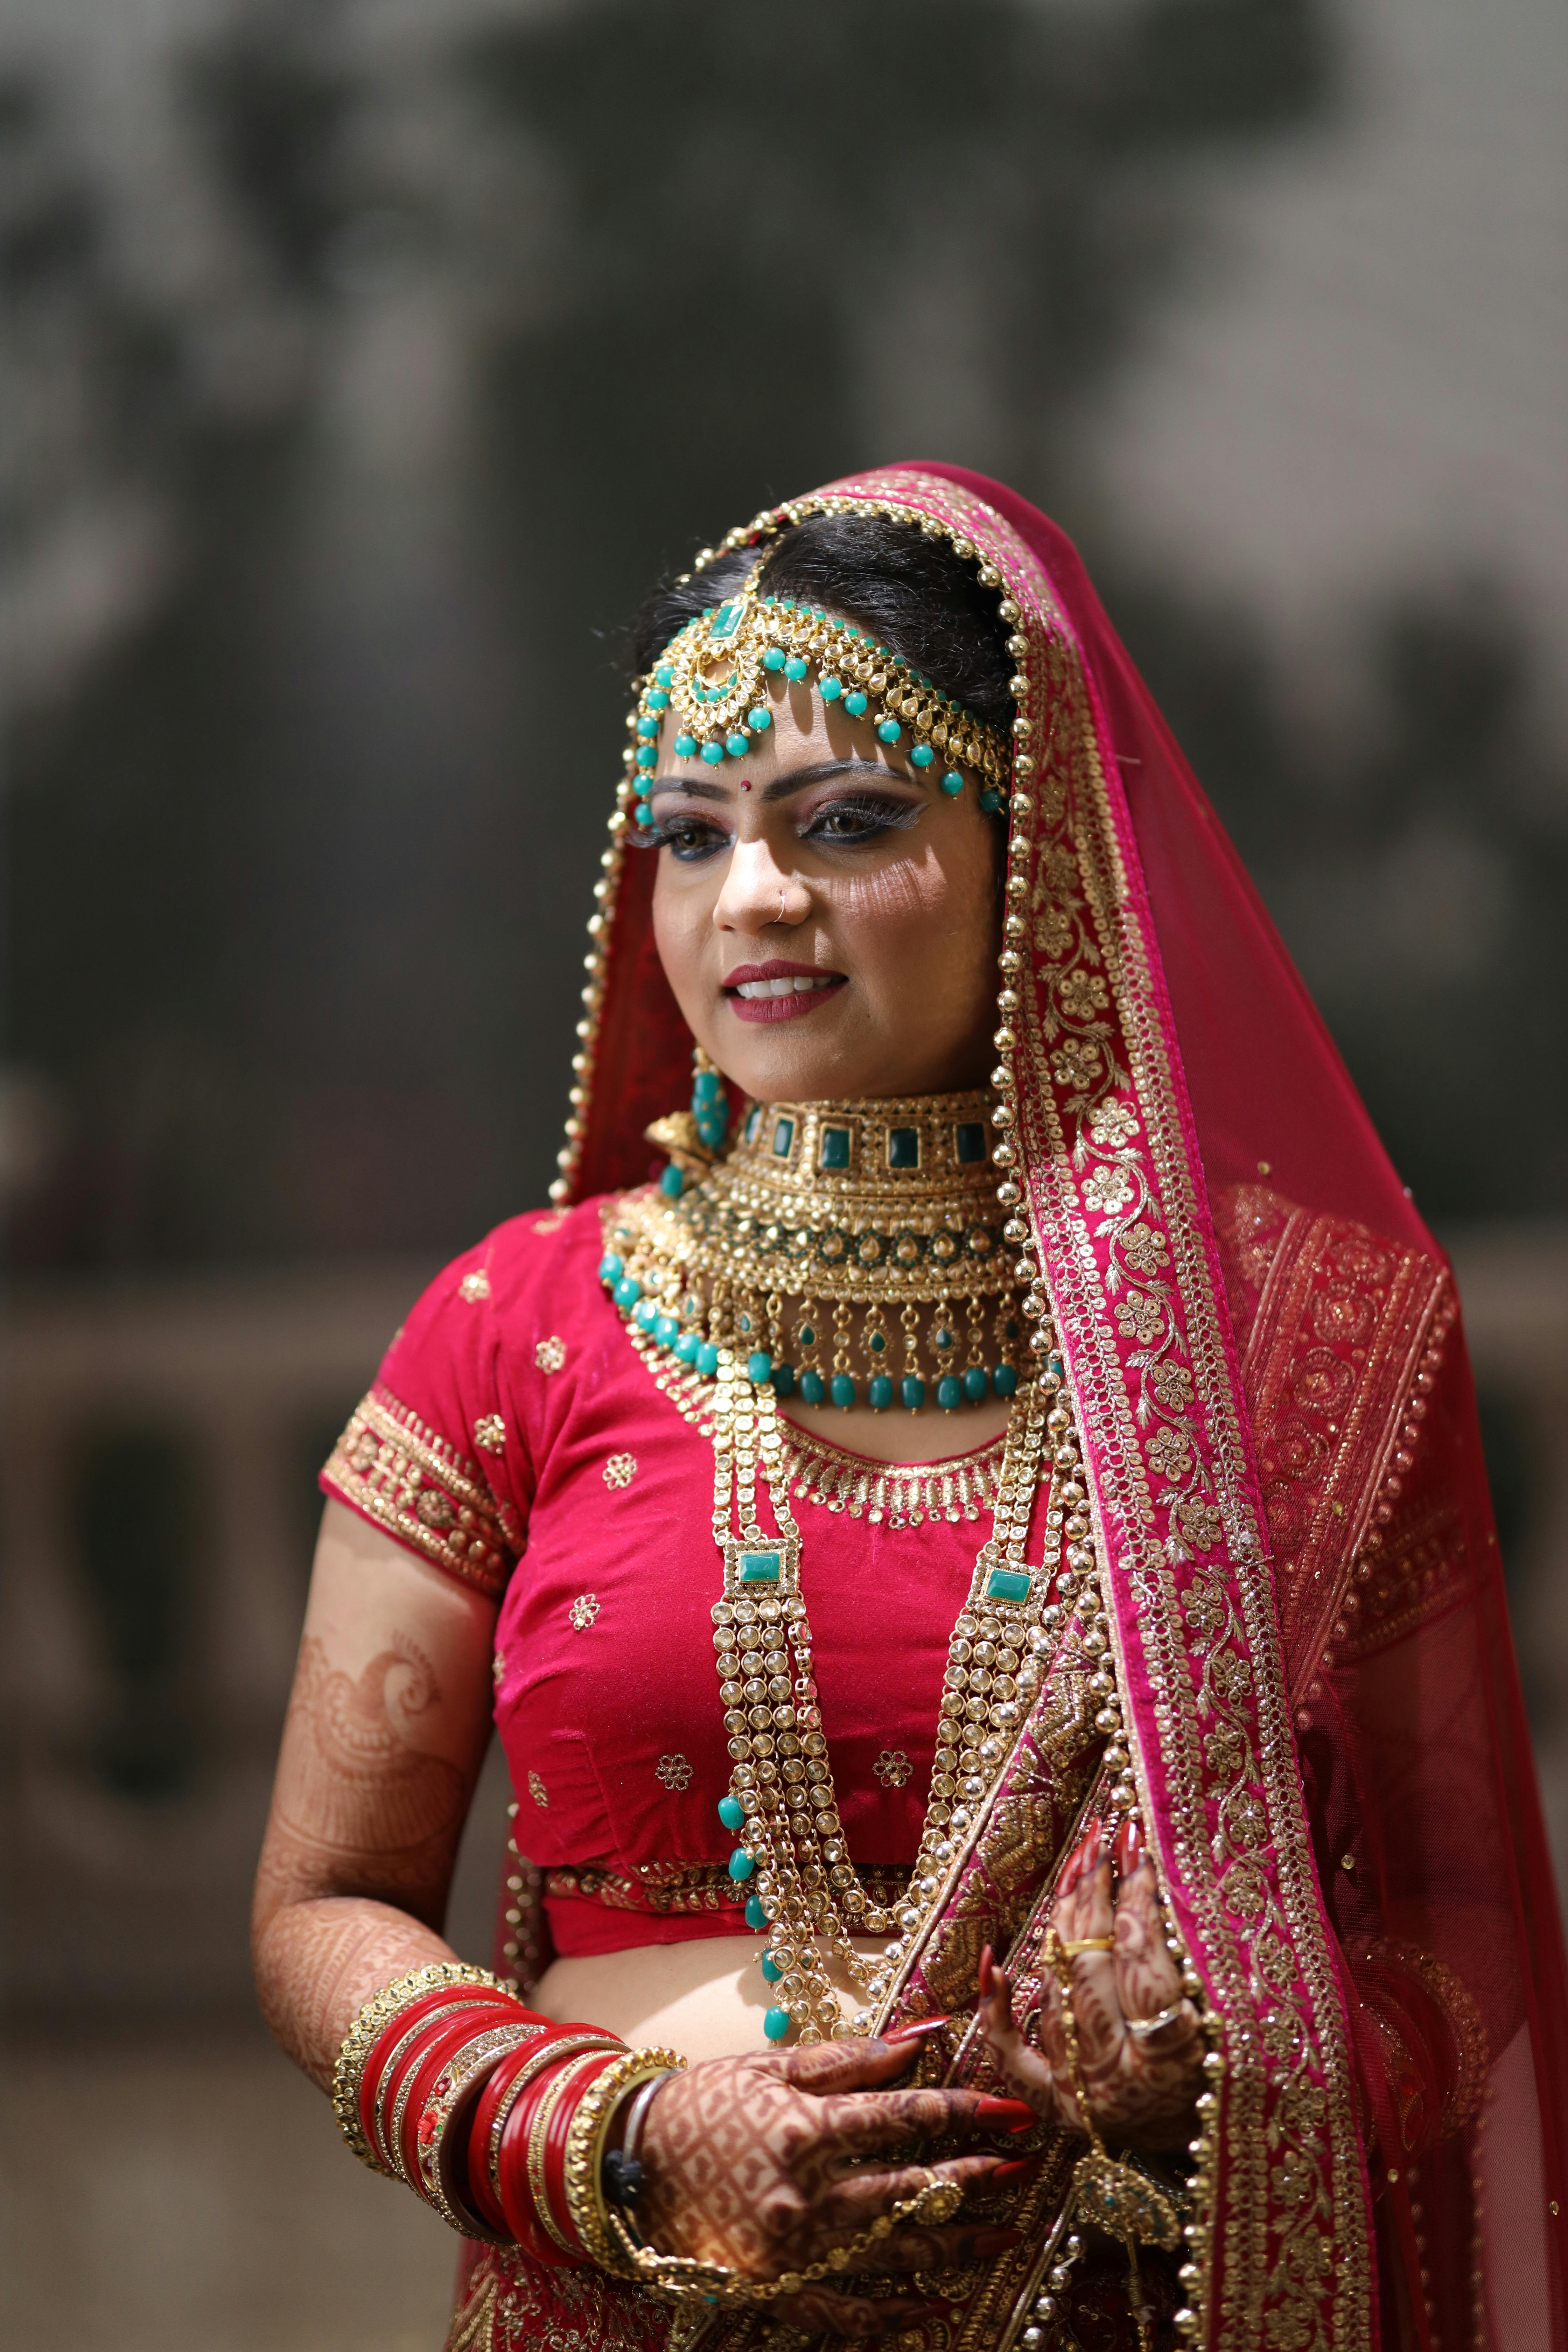 10+ Photos Of Rajasthani Brides That Will Mesmerise You! | Rajasthani bride,  Indian bride makeup, Indian wedding outfits